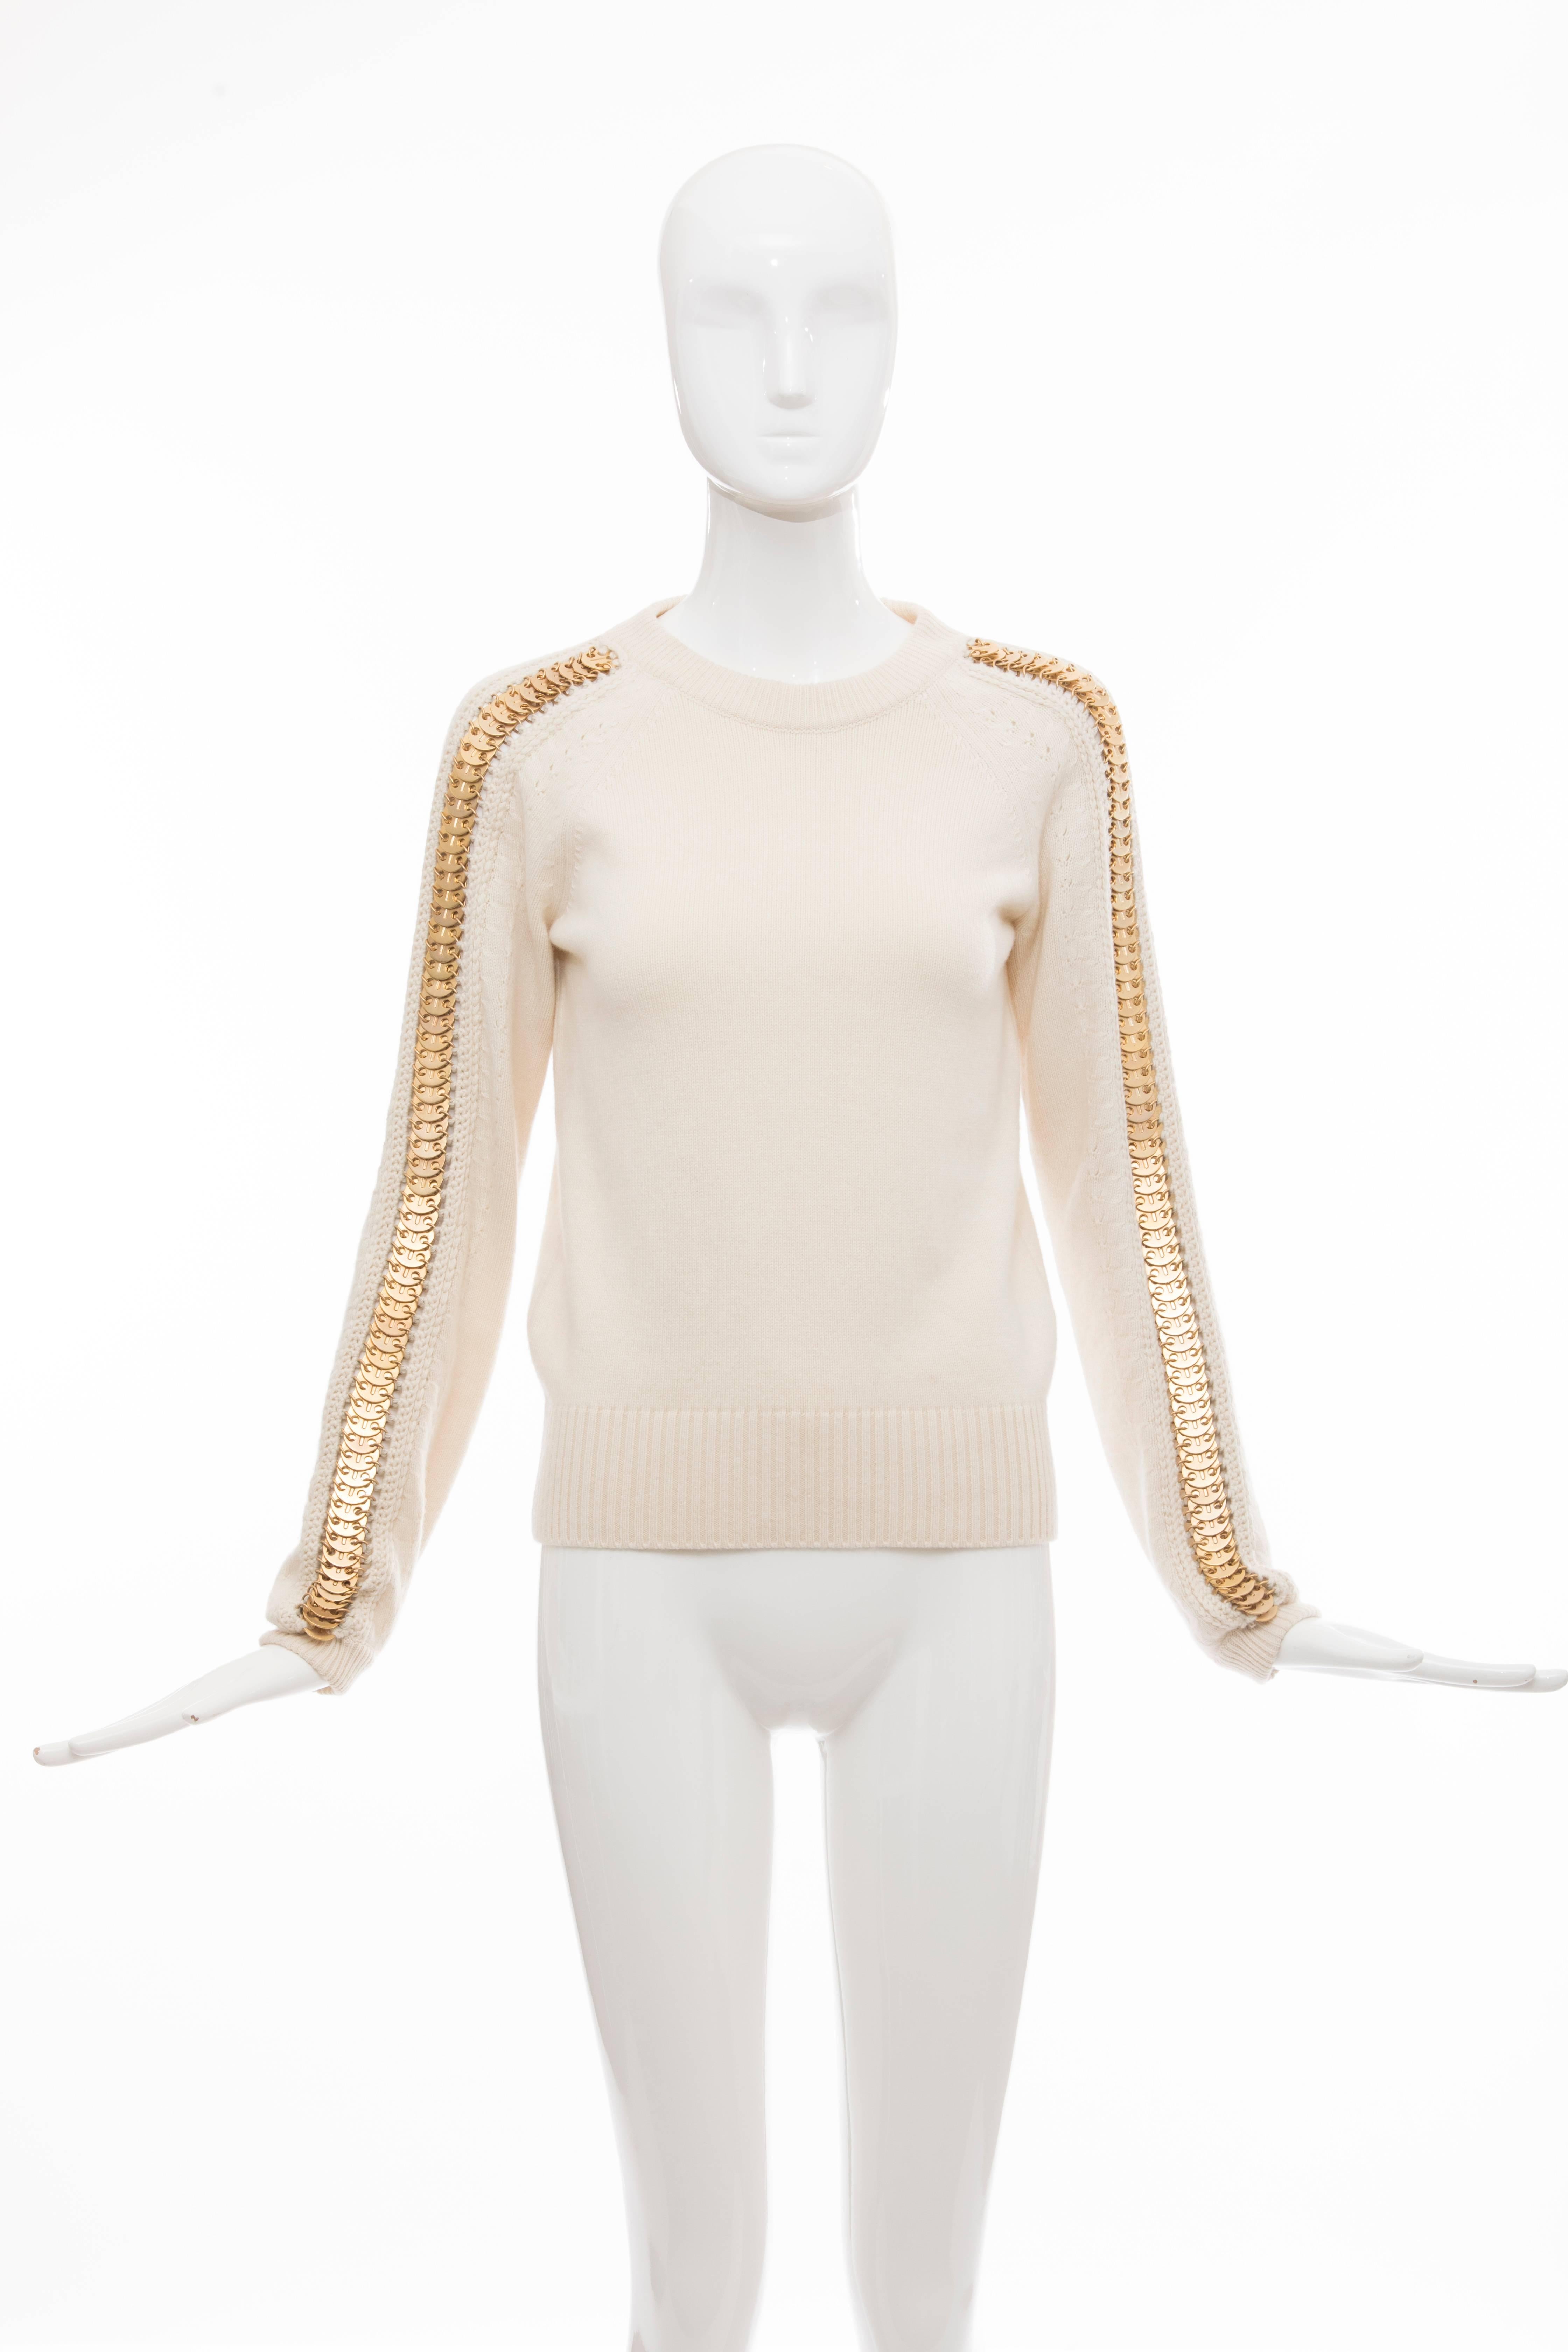 Paco Rabanne knit top with crew neck, matte golg hardware embellishments at long sleeves and rib knit trim throughout.

FR. 36
US. 4

Bust: 38, Waist 38, Length 23
